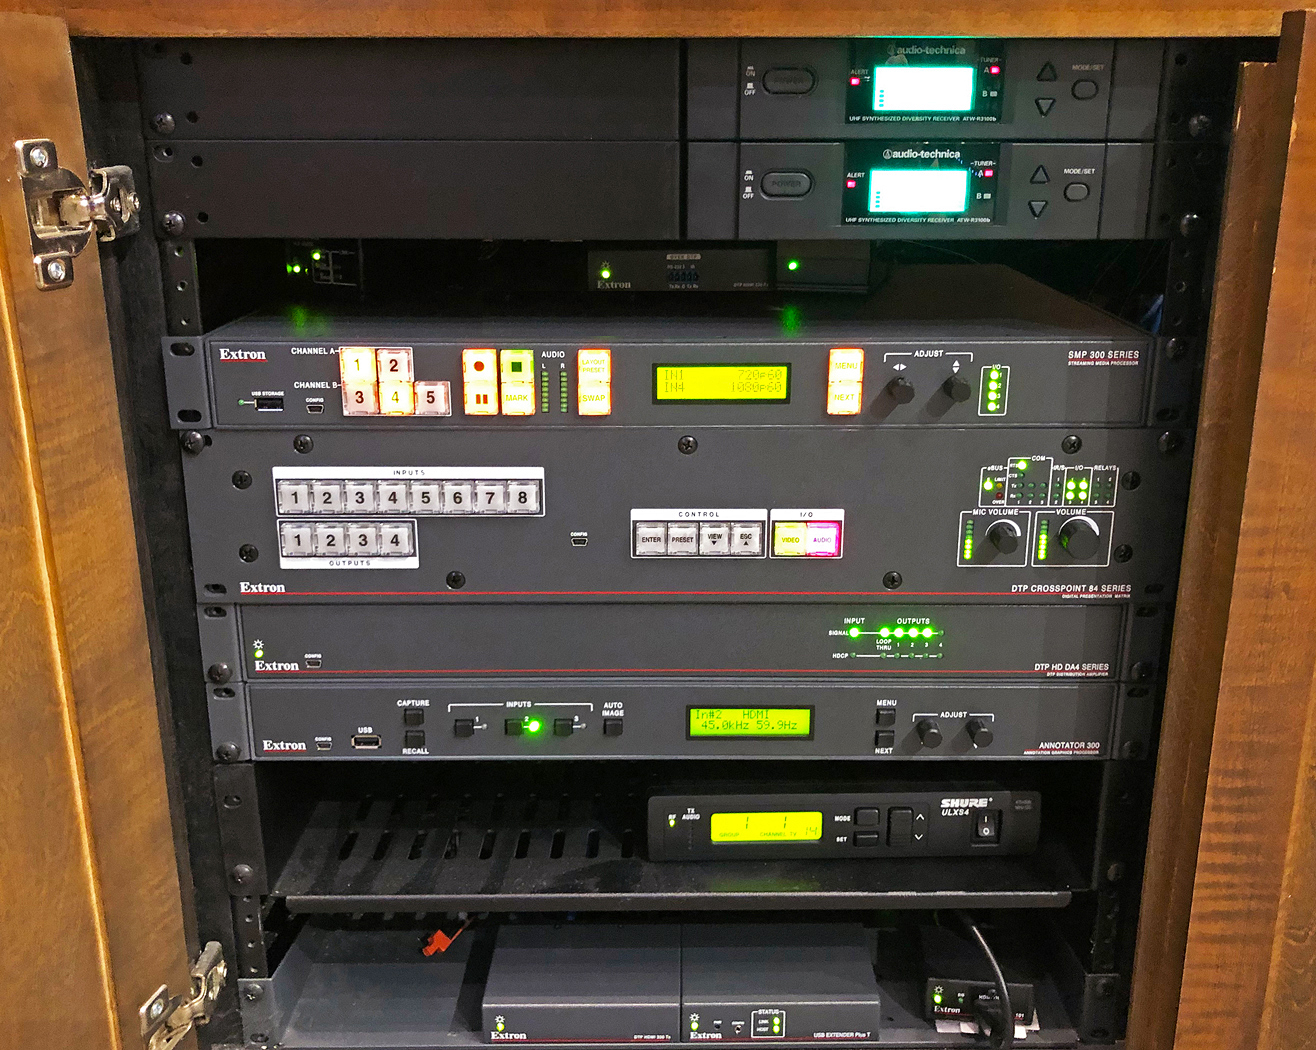 AV Operator desk equipment bay showing some of the Extron components. Top to bottom: SMP 351, DTP CrossPoint 84 4K, DTP HD DA4 4K, Annotator 300. DTP HDMI 4K 230 Tx and USB Extender Plus T are at very bottom.